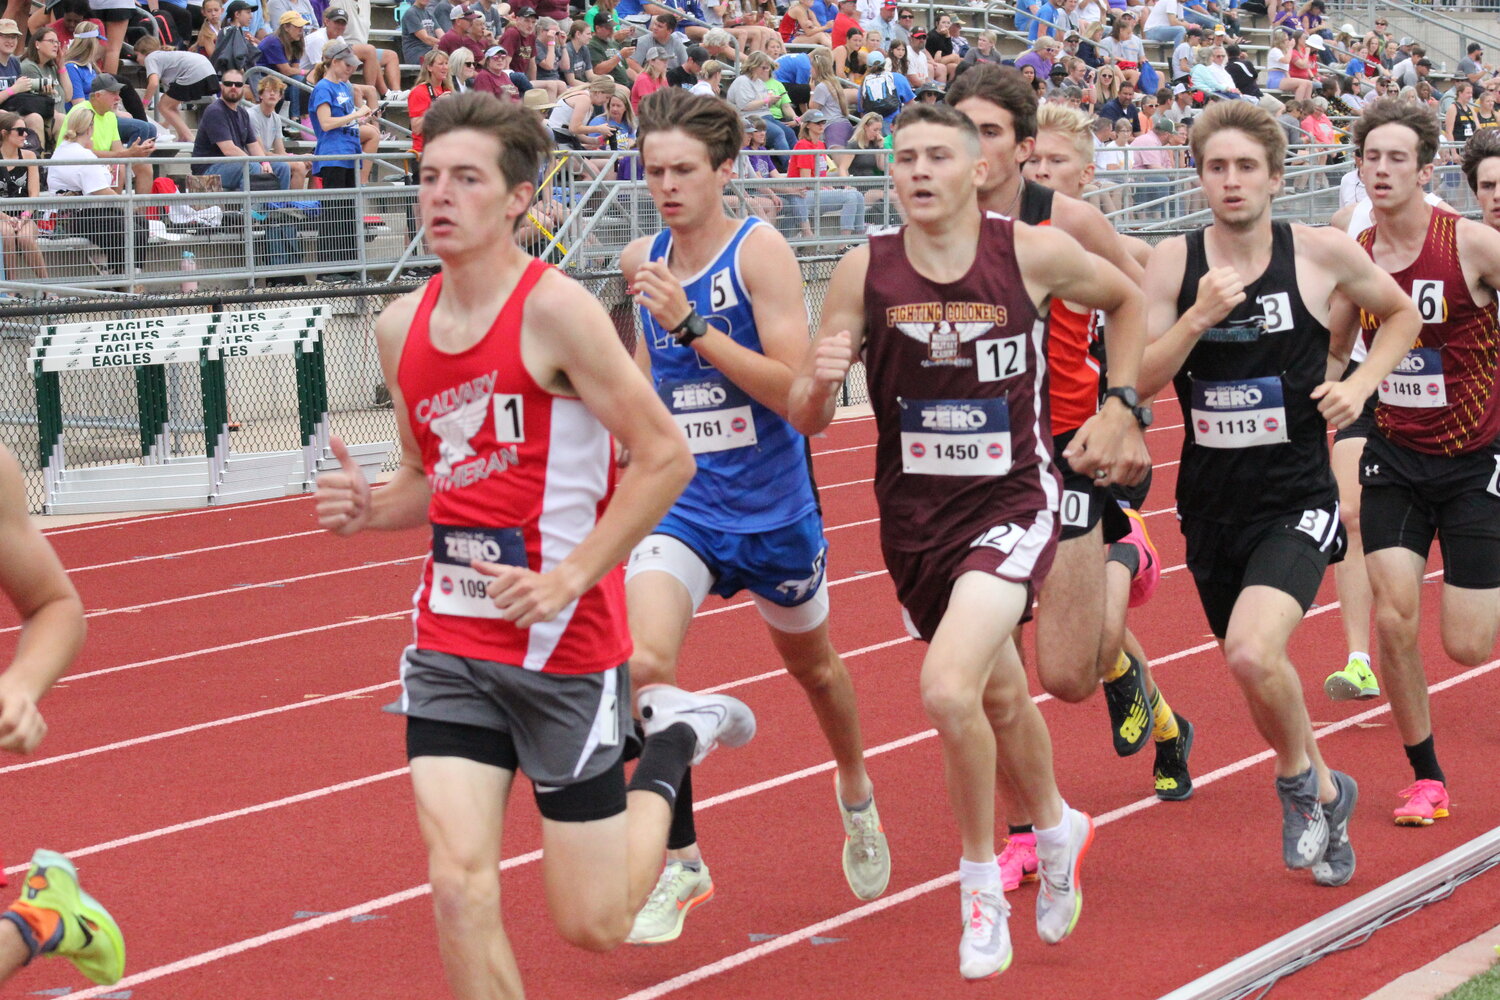 Missouri Military Academy senior Bryson Powell runs in the 1600-meter run on Friday at the Class 2 state meet at Adkins Stadium in Jefferson City. Powell finished ninth to just miss the top eight to medal.